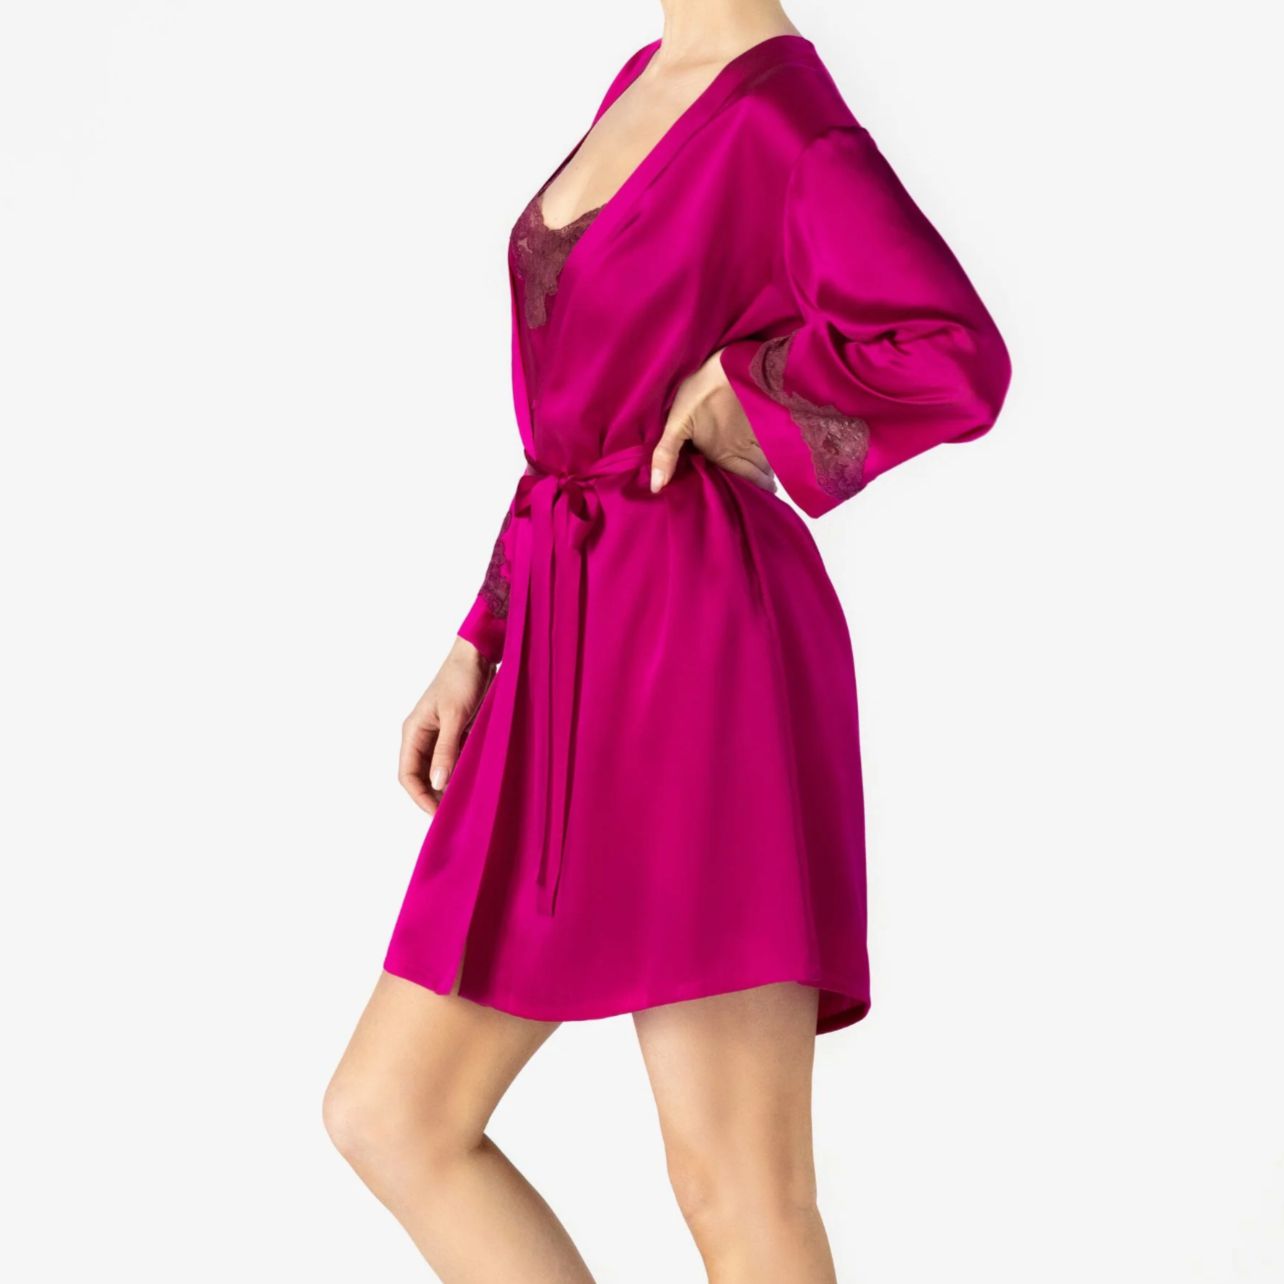 NK iMode Morgan Iconic Short Silk Robe in Pink Ruby-Robes-NK iMode-Pink Ruby-Medium-Anna Bella Fine Lingerie, Reveal Your Most Gorgeous Self!